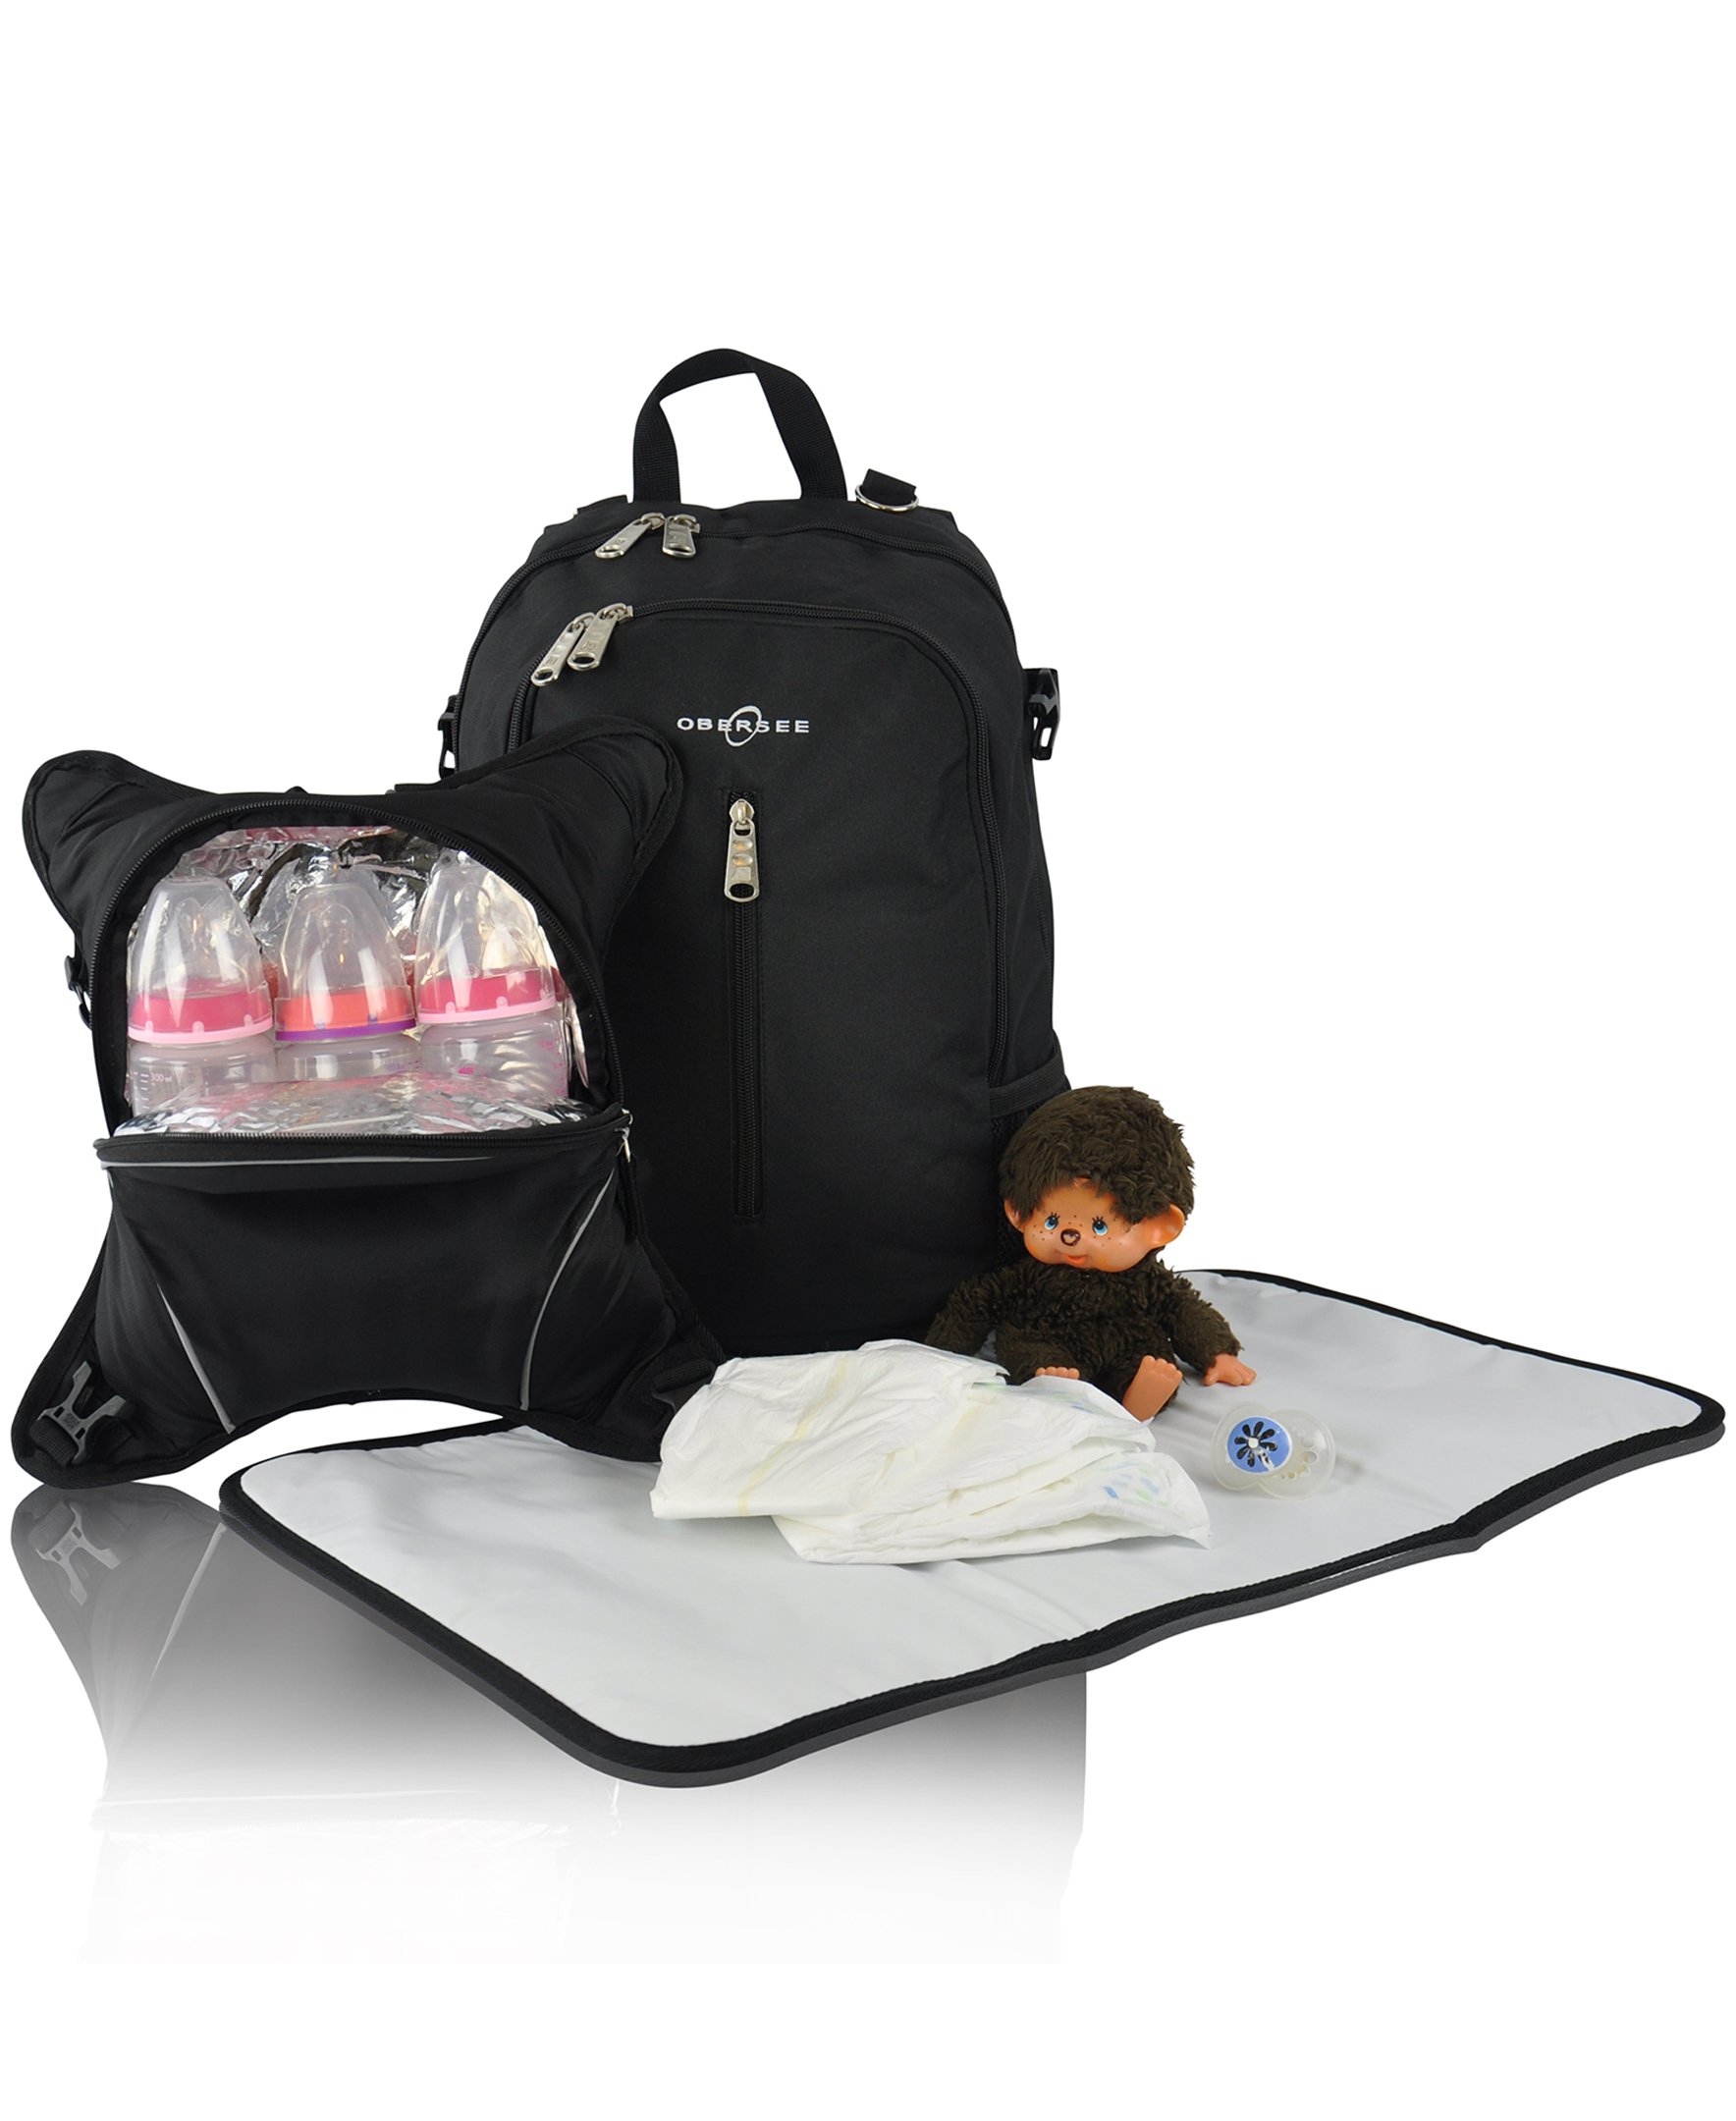 Obersee Rio Diaperbag Backpack | Detachable Bottle Cooler | Large Size Fully Padded Diaper changing mat - image 3 of 11